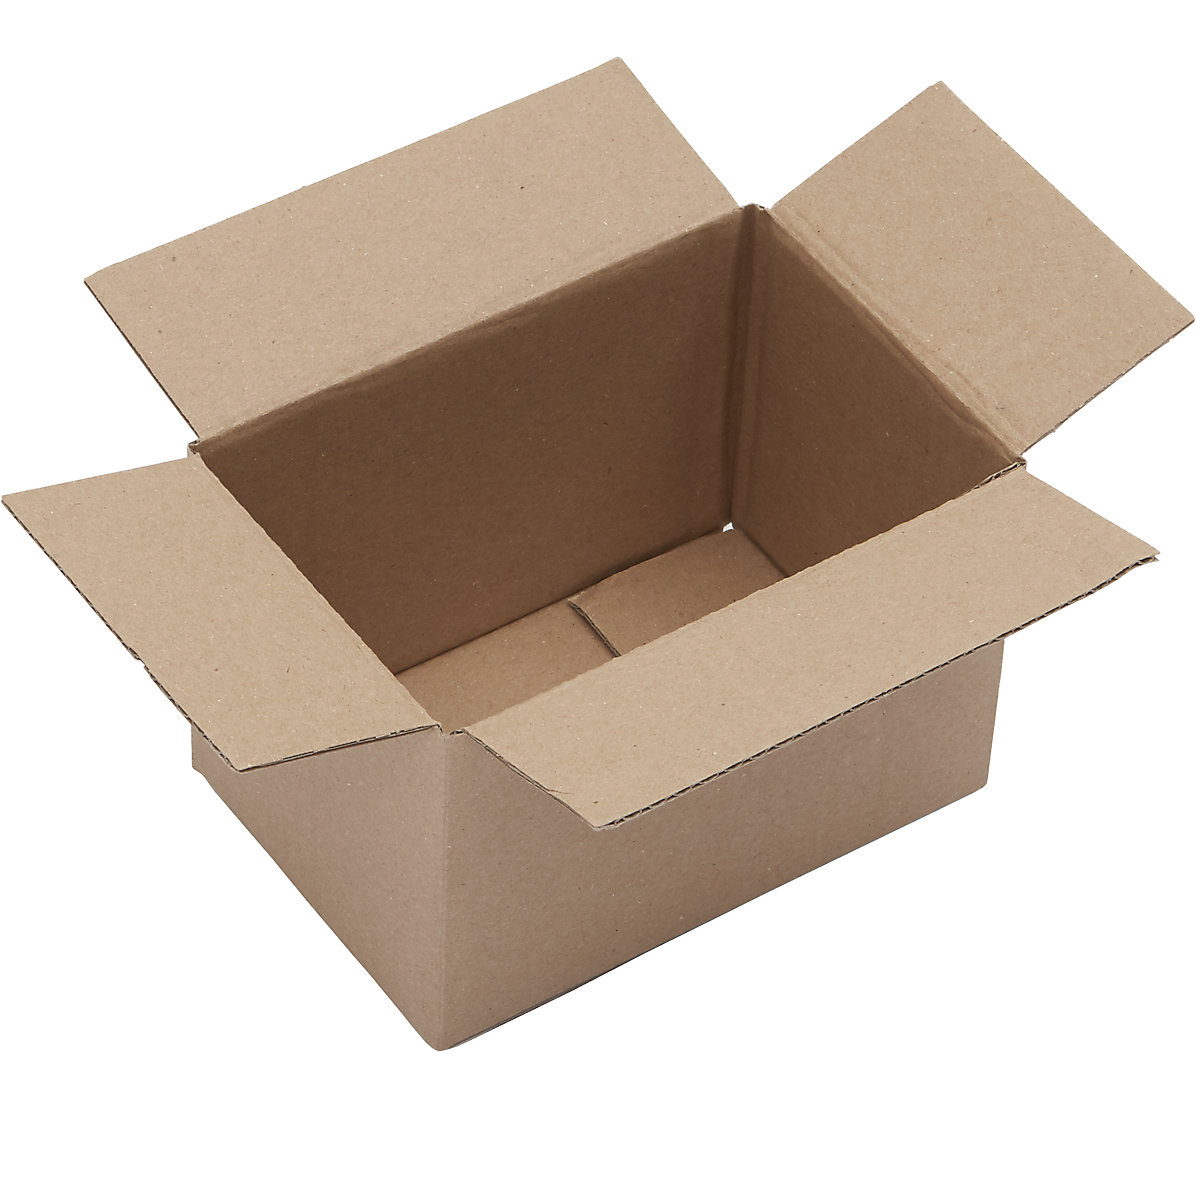 Corrugated cardboard folding boxes, FEFCO 0201, single fluted, pack of 50, internal dimensions 150 x 100 x 100 mm-1